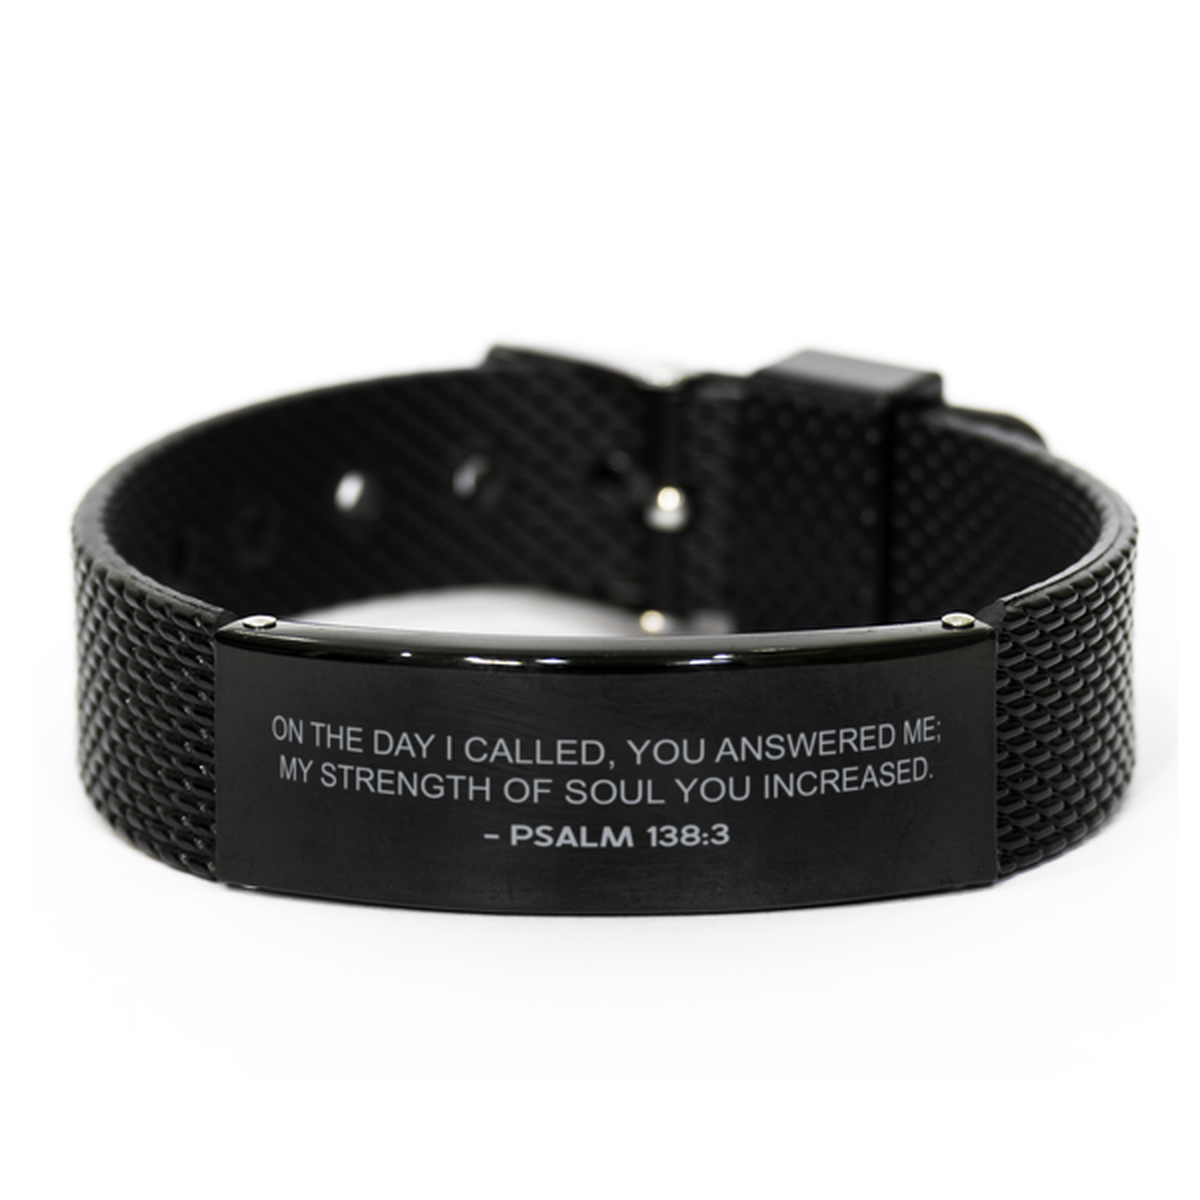 Christian Black Bracelet,, Psalm 138:3 On The Day I Called, You Answered Me; My Strength, Motivational Bible Verse Gifts For Men Women